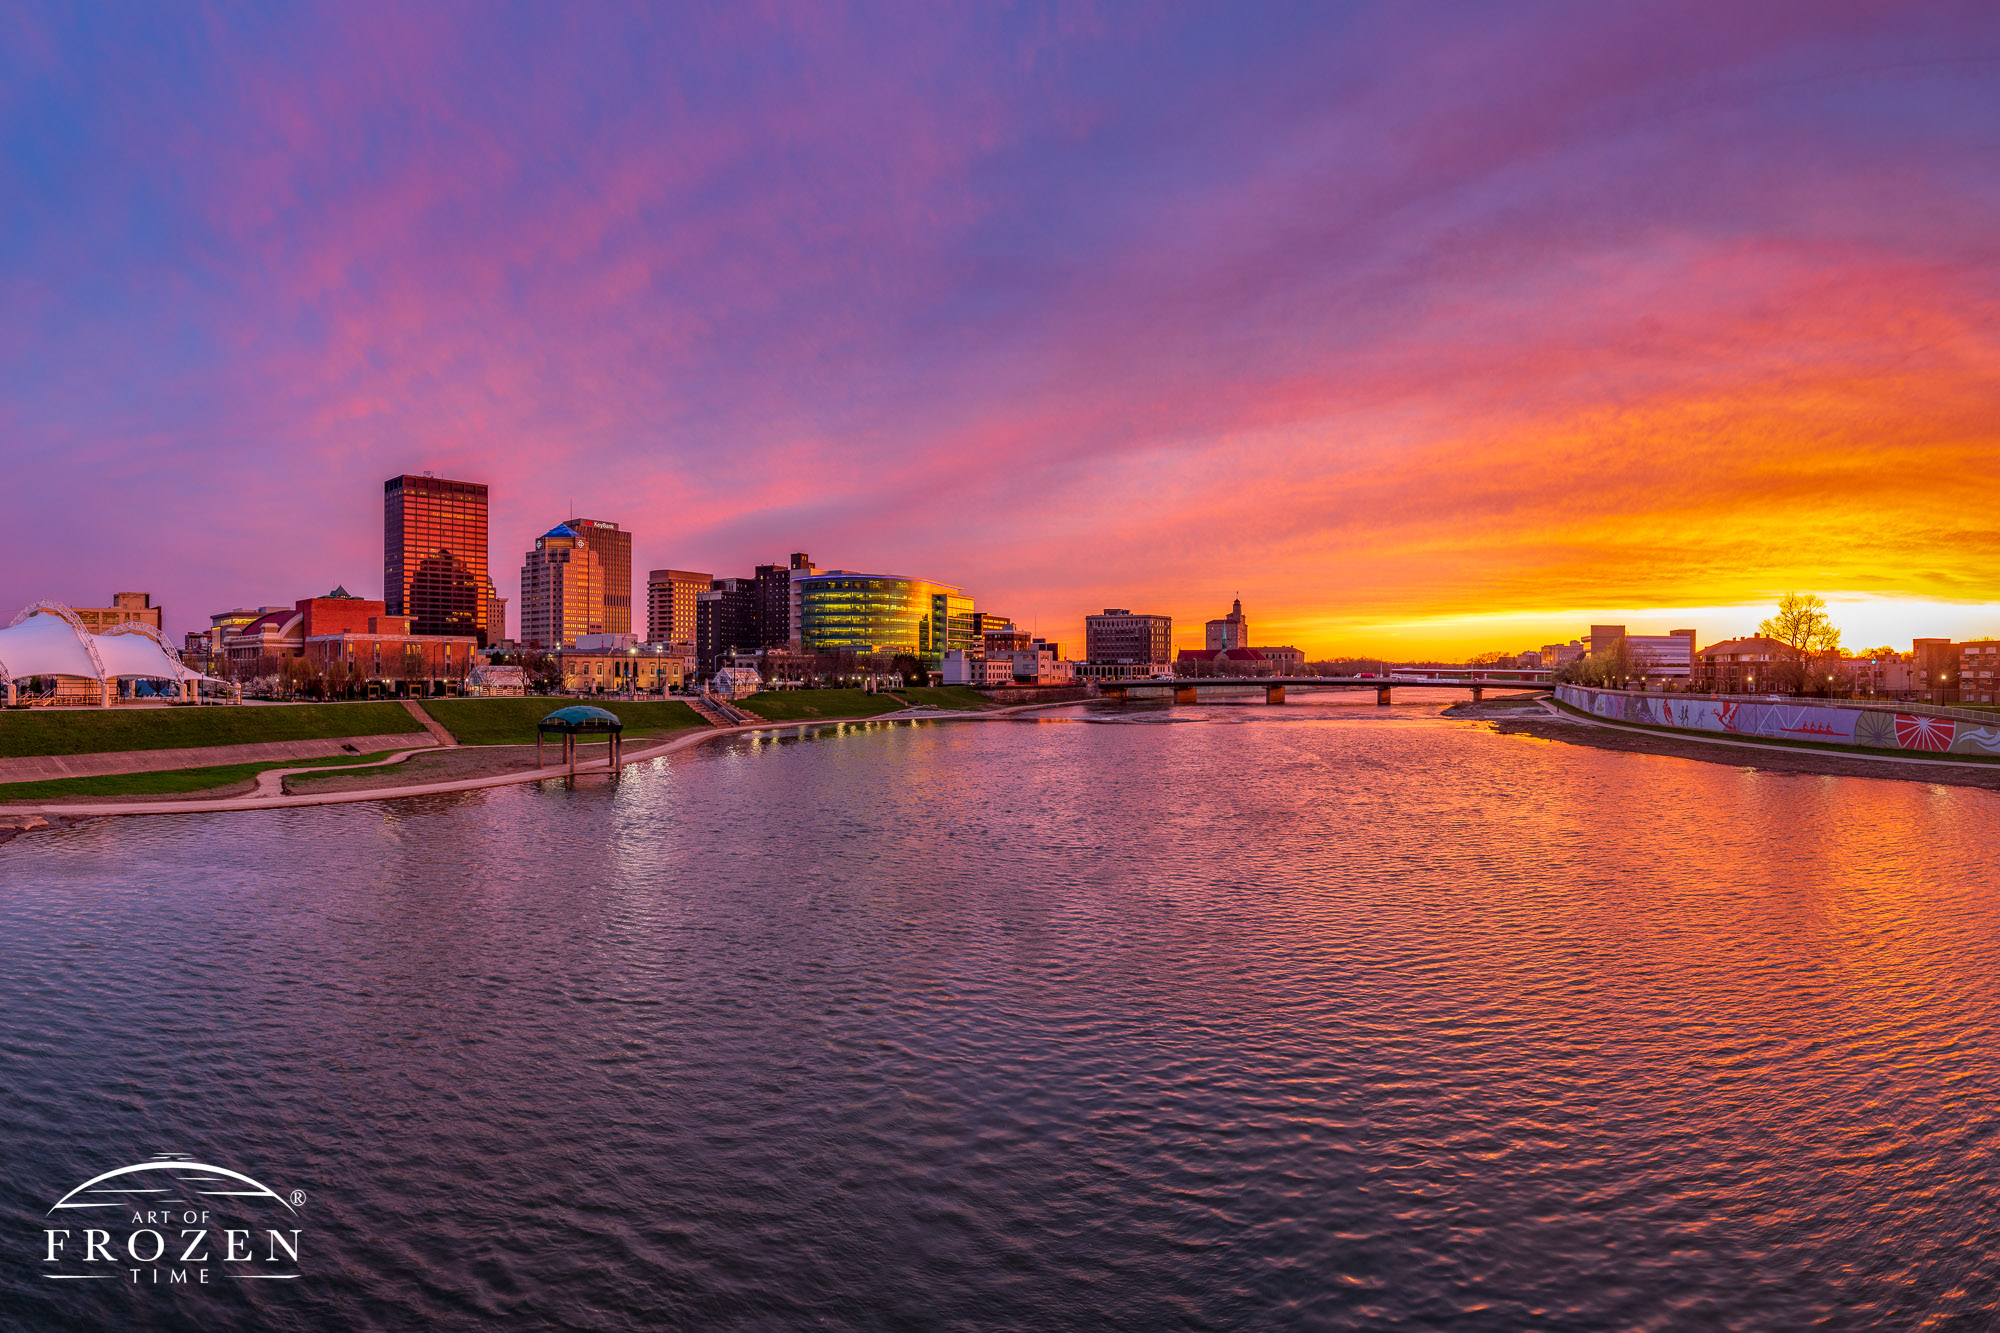 Colorful Dayton skyline sunset where the sun illuminated the clouds from underneath in warm colors as the Miami River took on interesting texture making for Dayton Fine Art Photography